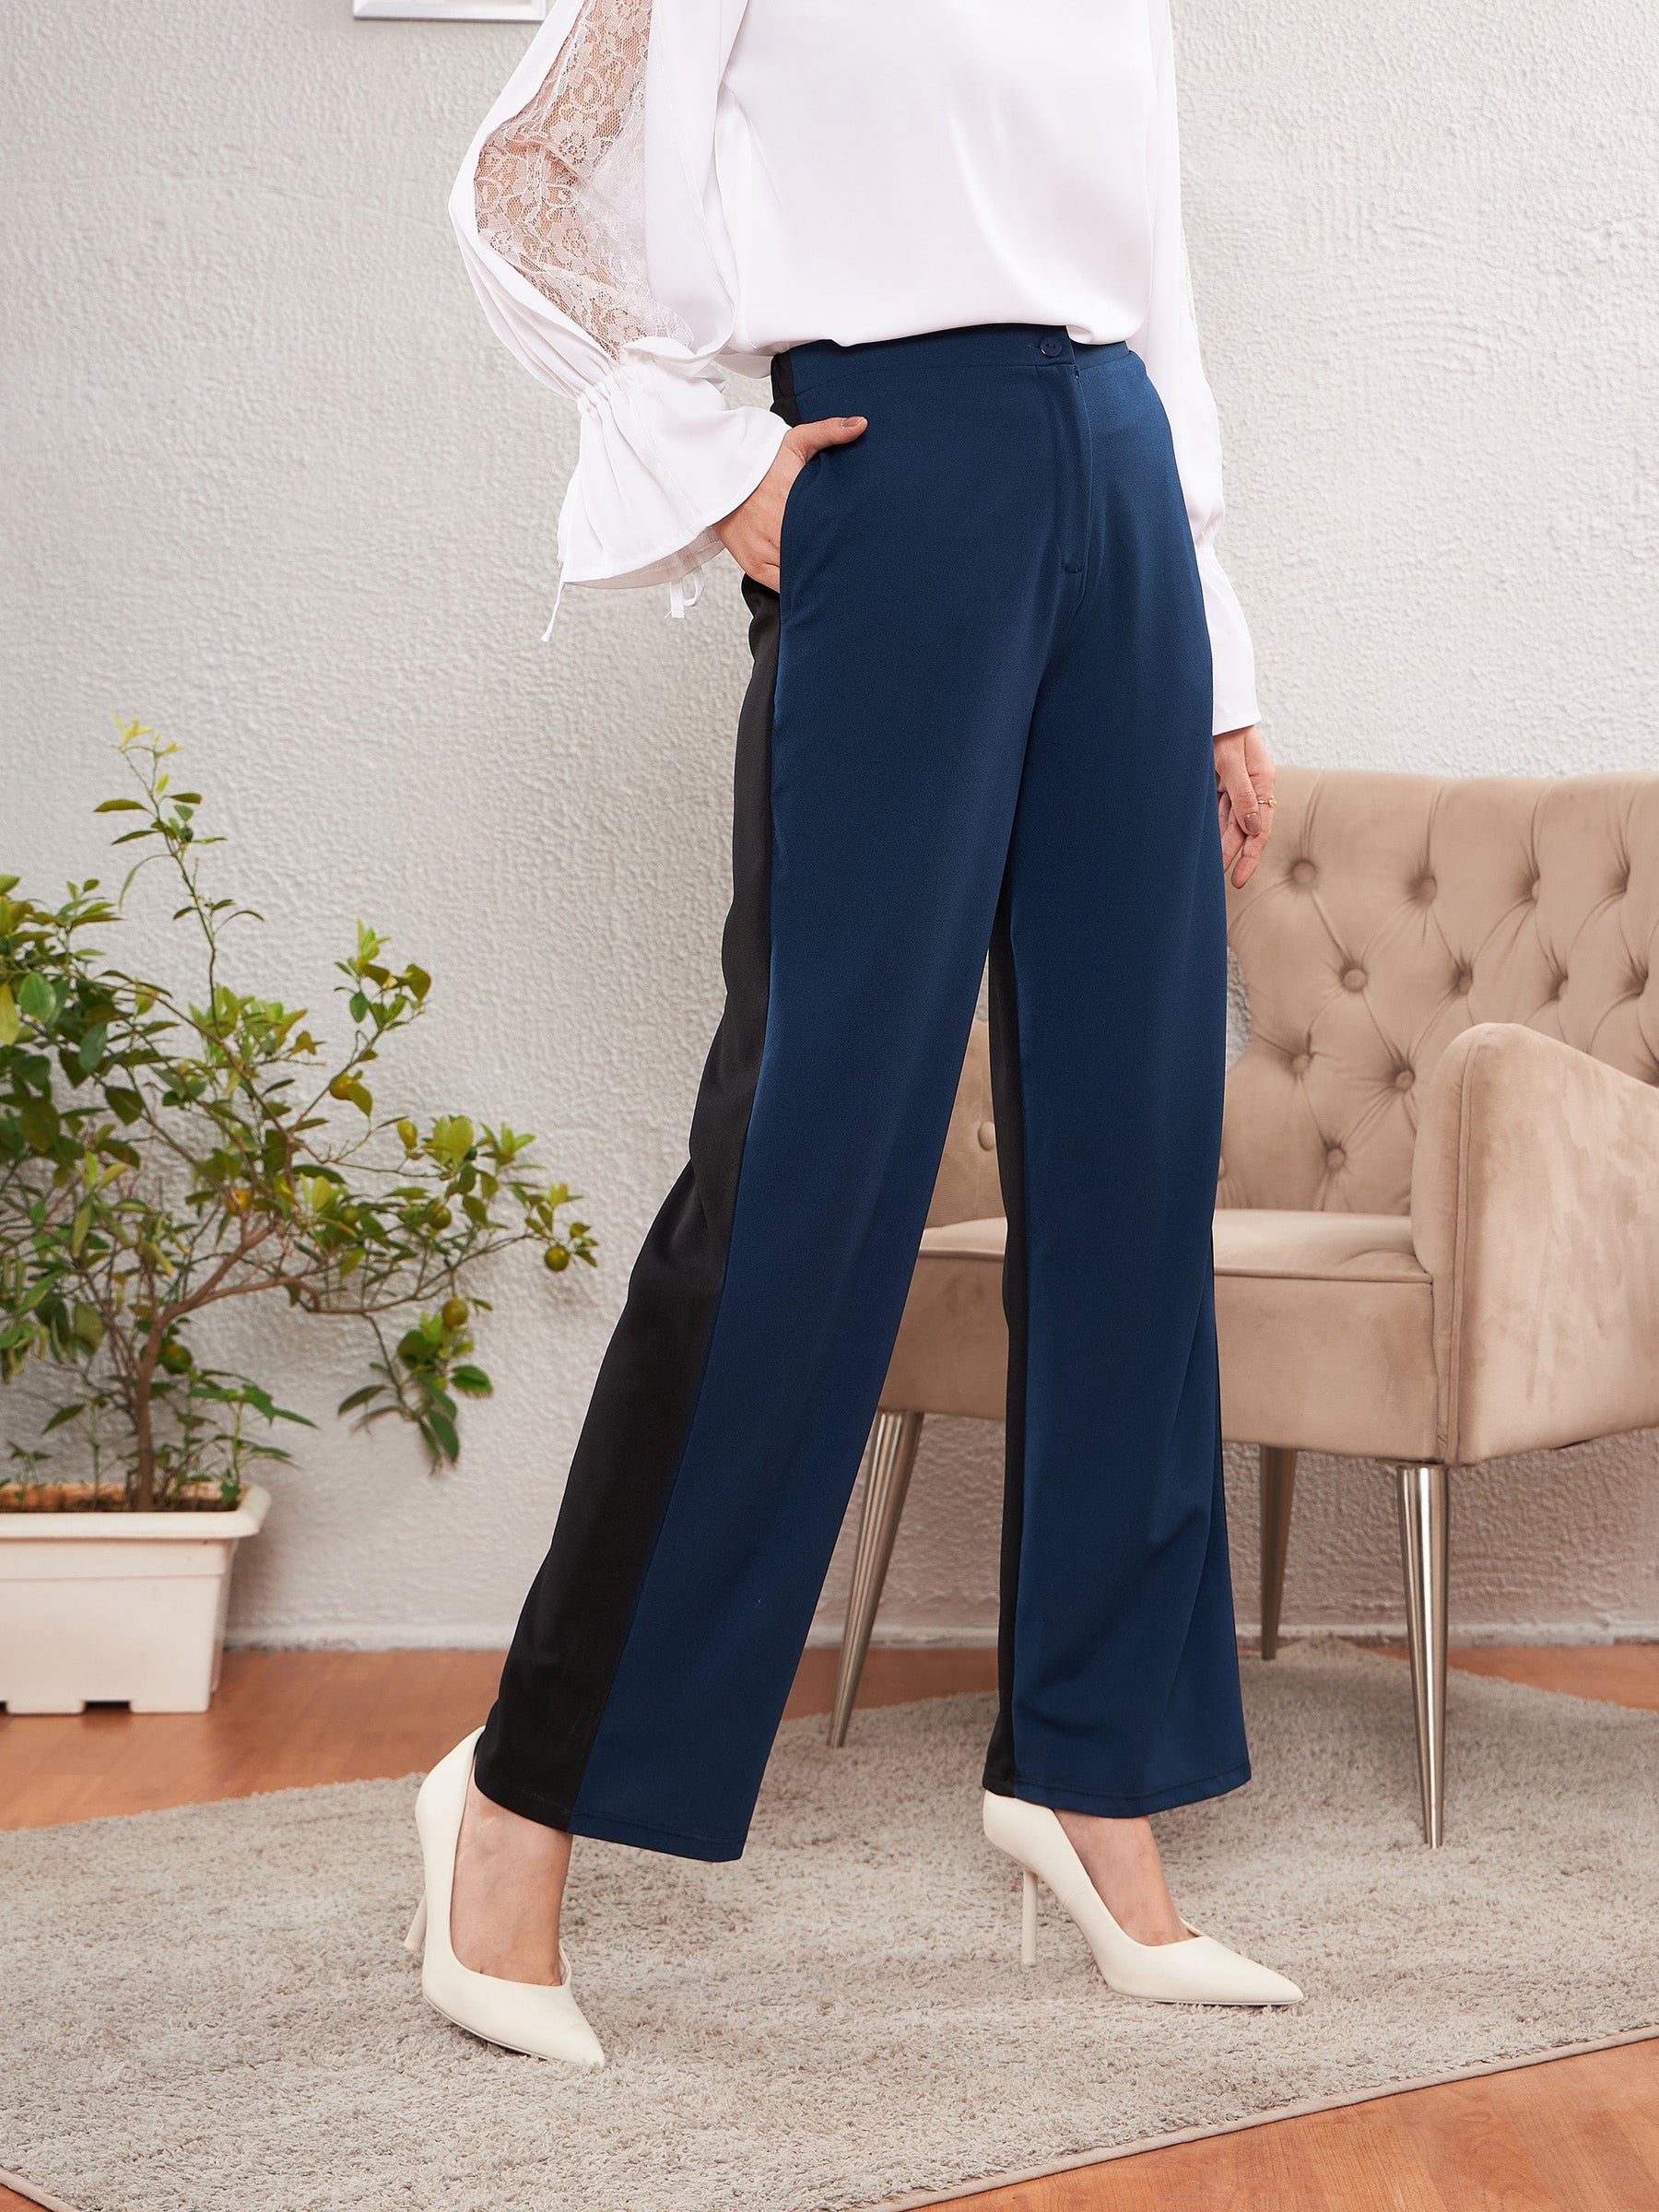 Women's Pants - Jeans, Joggers, Linen, Chinos - Sussan